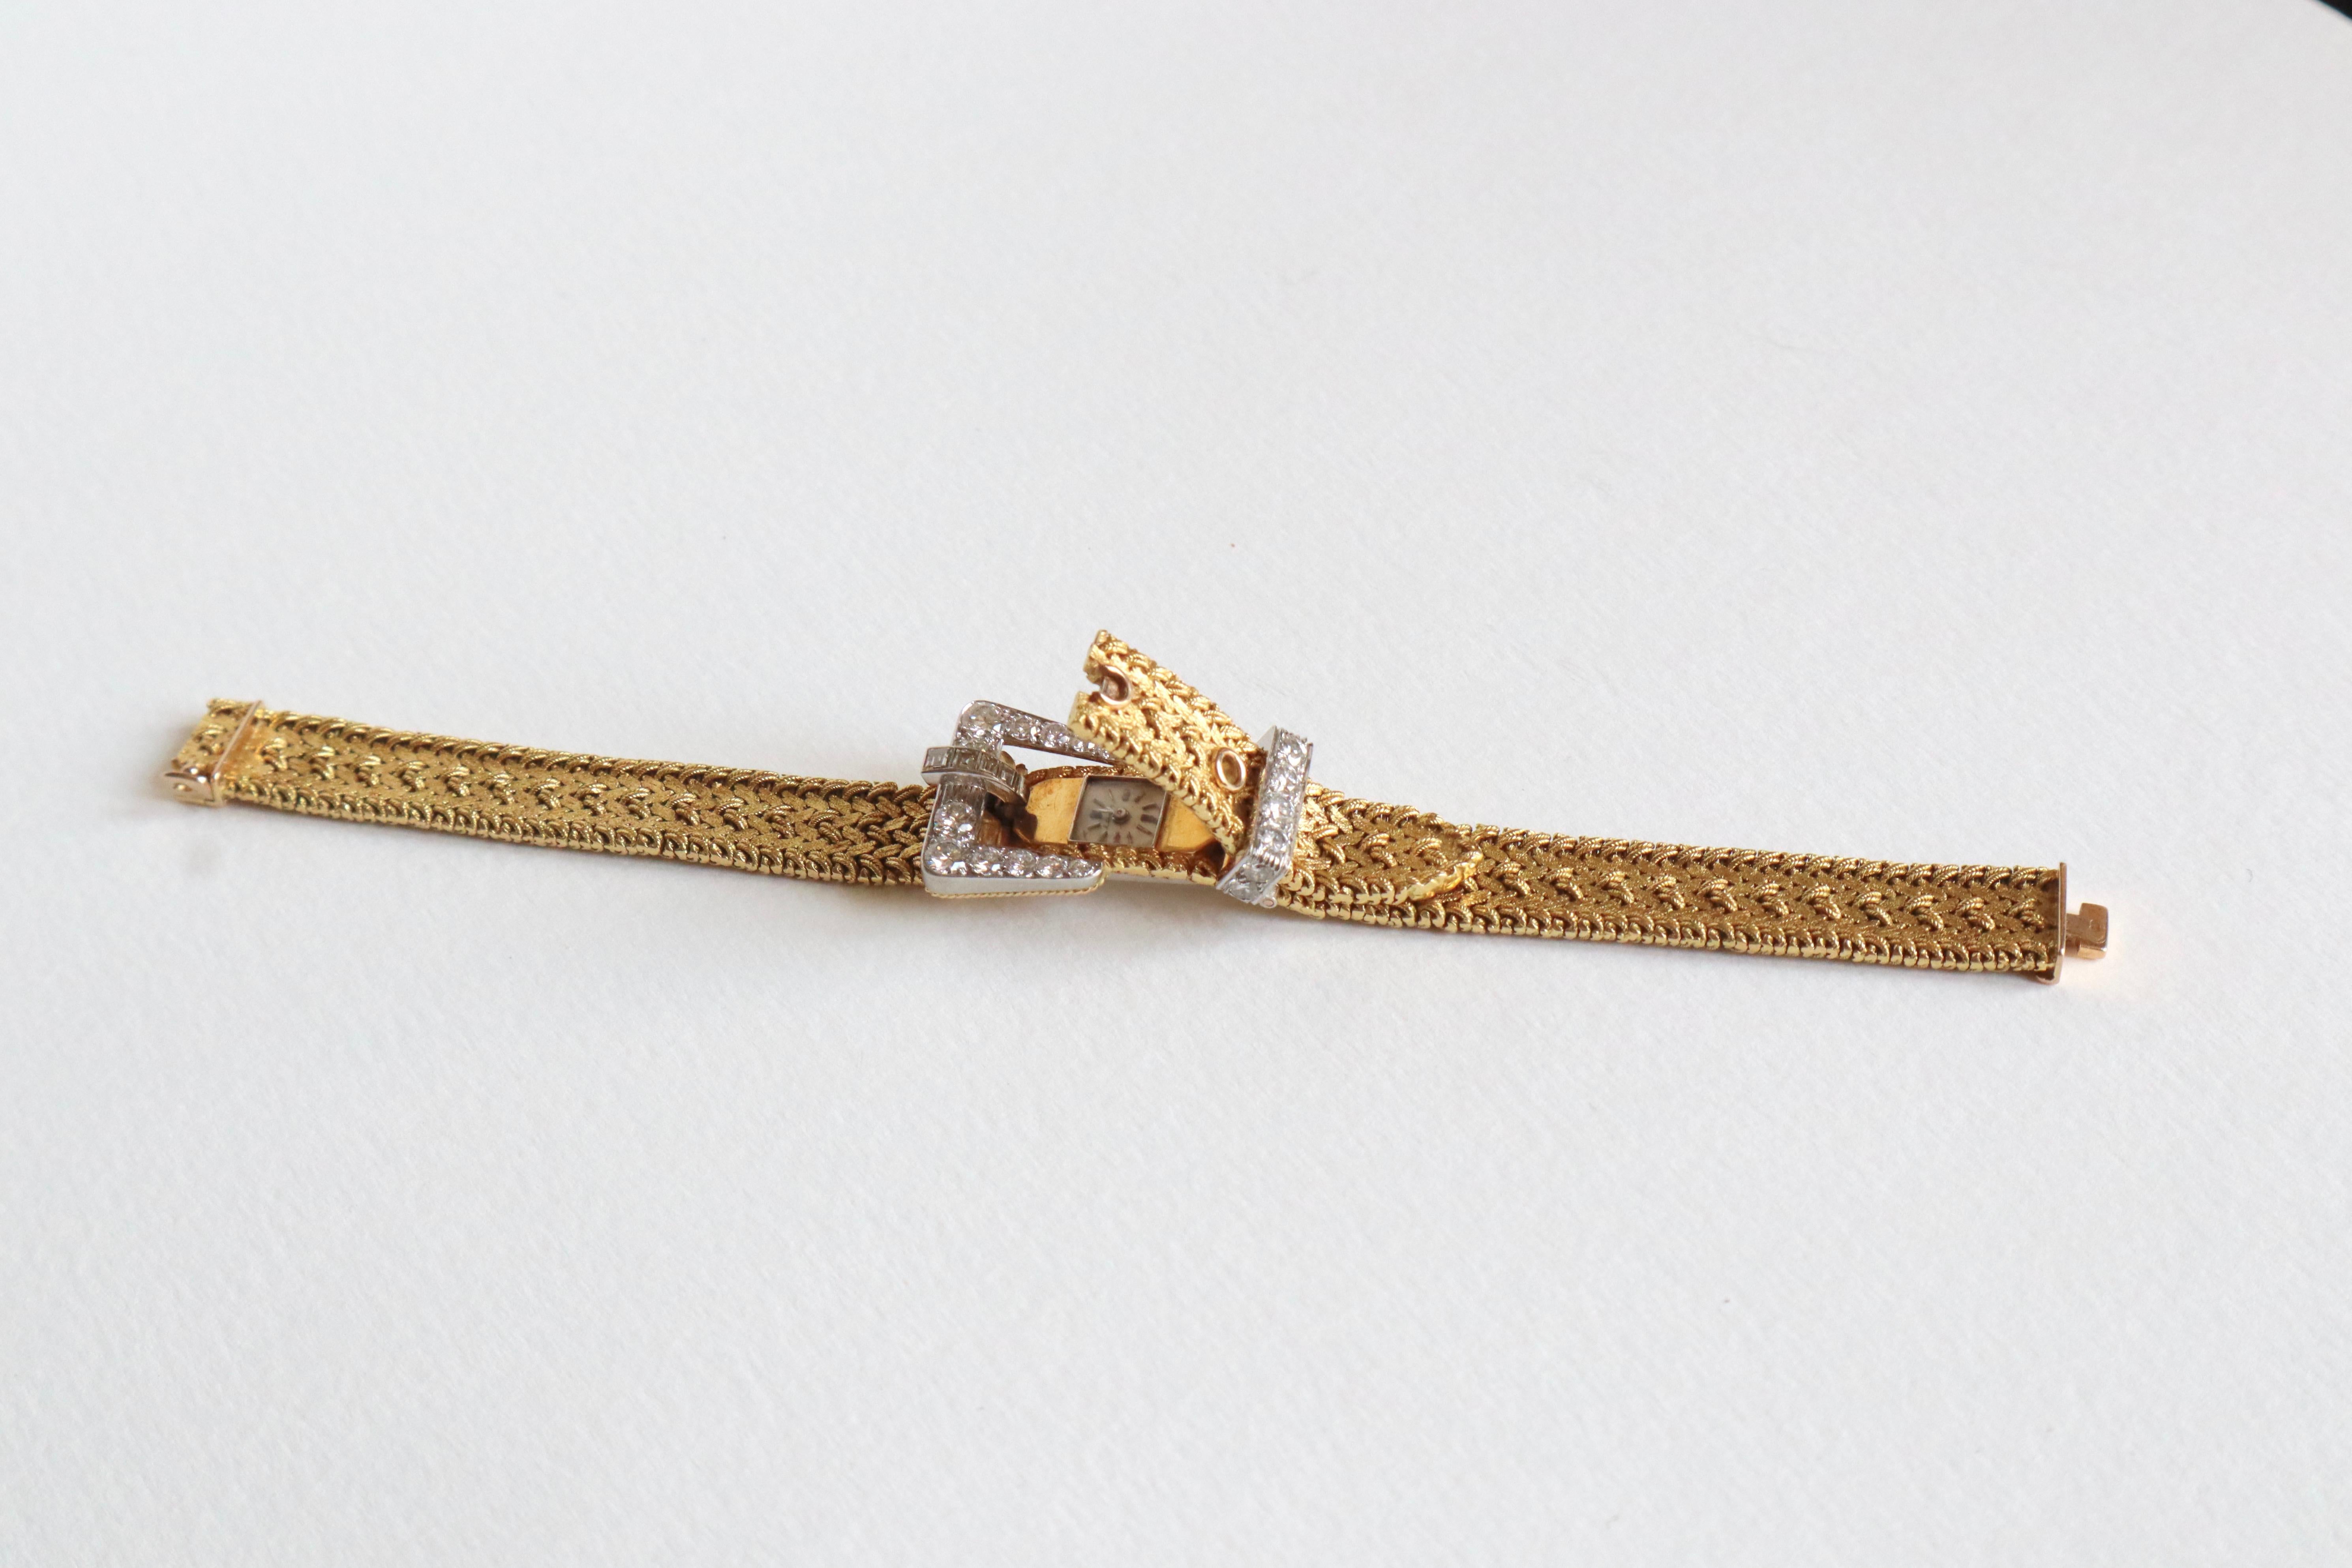 Women's Secret Bracelet watch in 18k yellow Gold and approx. 3 Carat Diamonds from KUTCHINSKY.
Mechanical Watch
Length of the Watch: 18 cm
Width of the Bracelet: 12 mm Weight: 50,6 g
Width of the Diamond Dial at the Widest: 22 mm